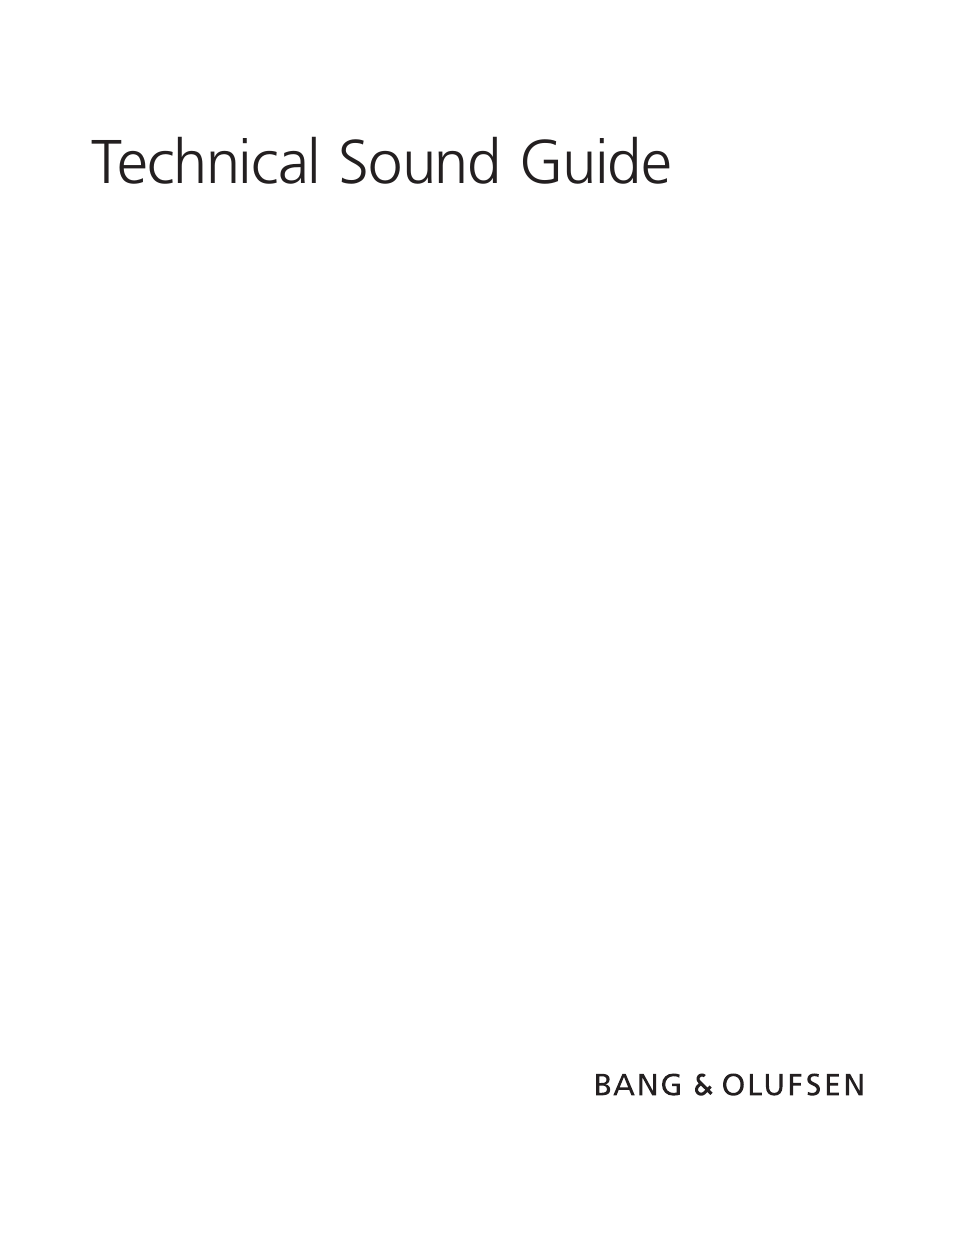 BeoVision Avant - Technical Sound Guide